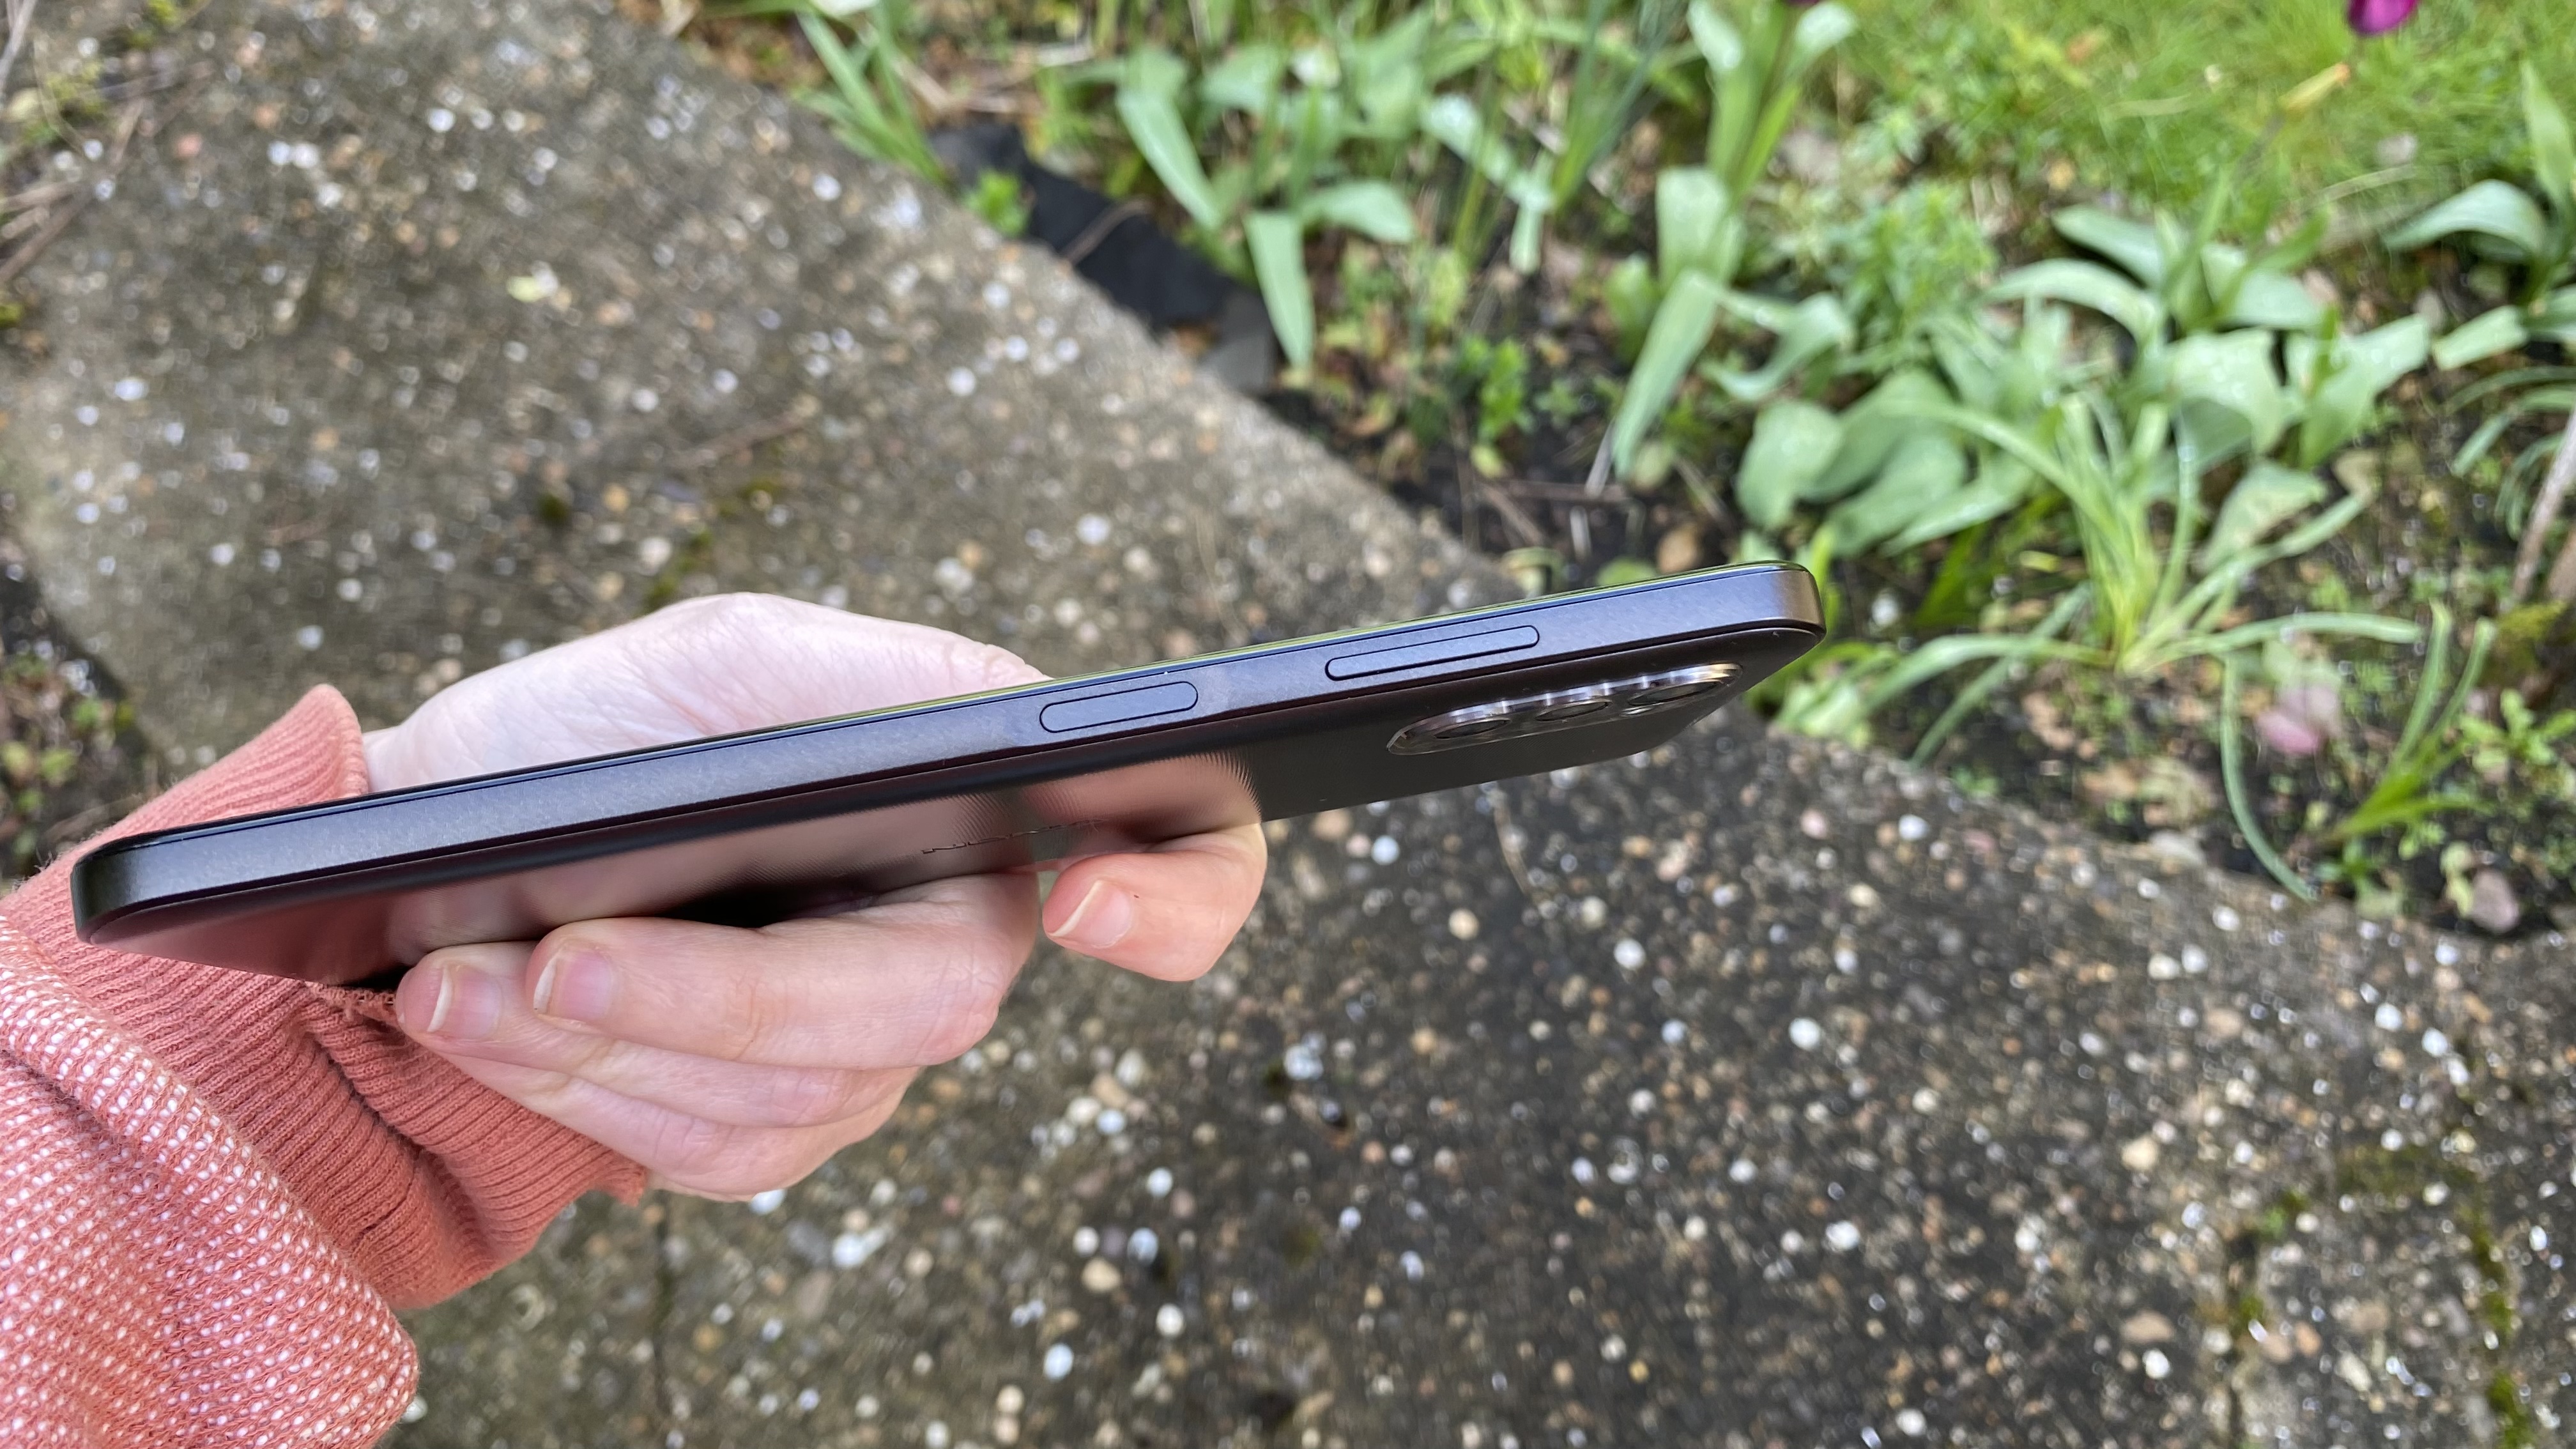 The Nokia G11 from the side, in someone's hand